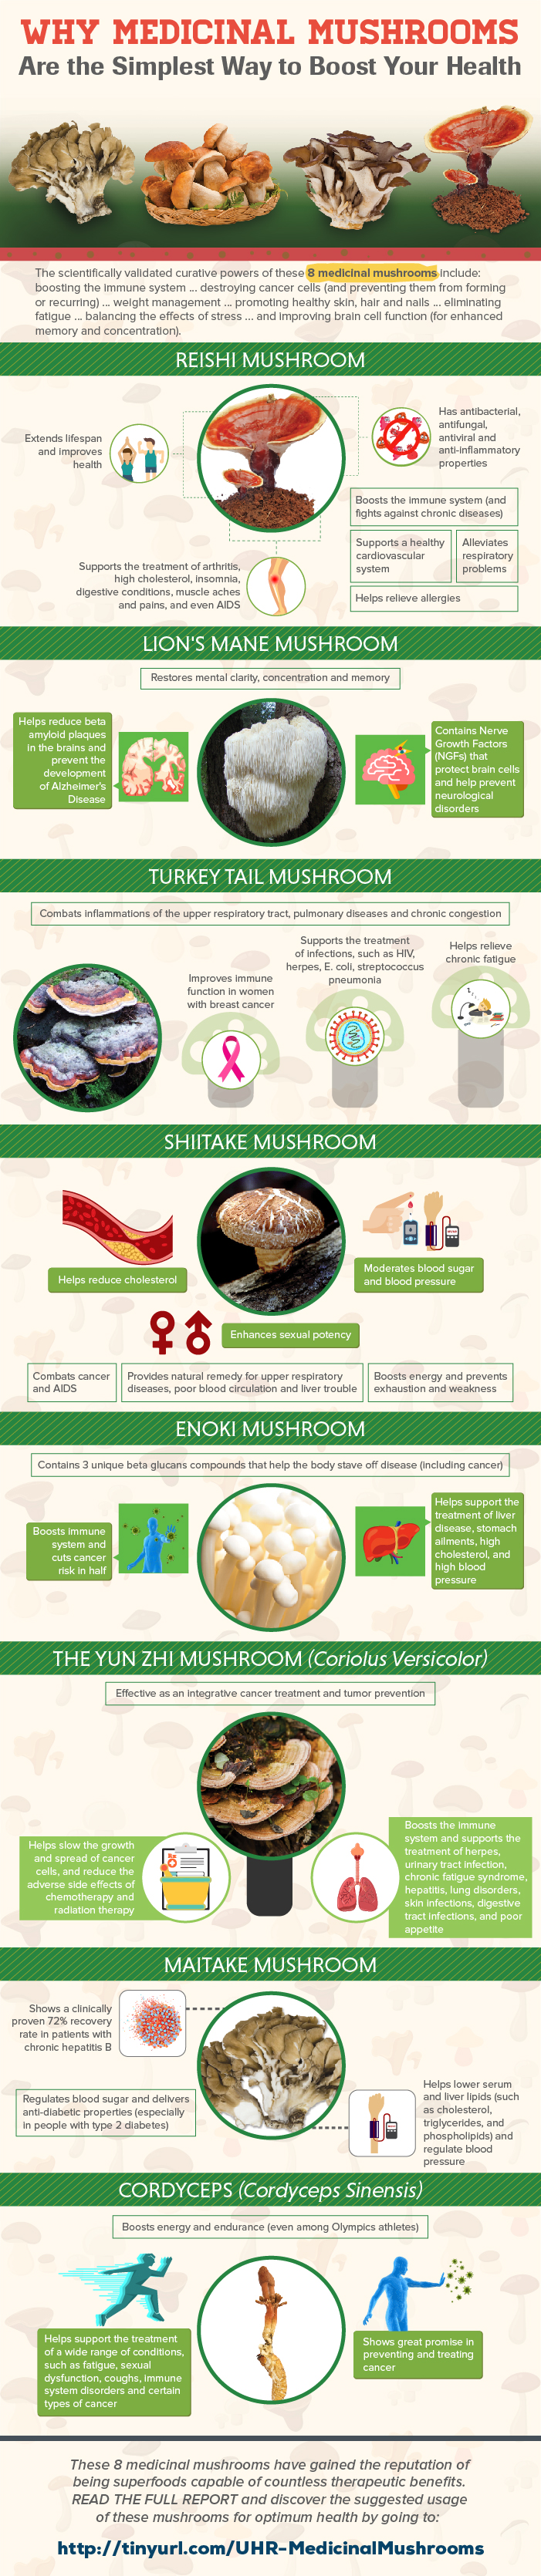 Infographic about 8 medicinal mushrooms that will boost health